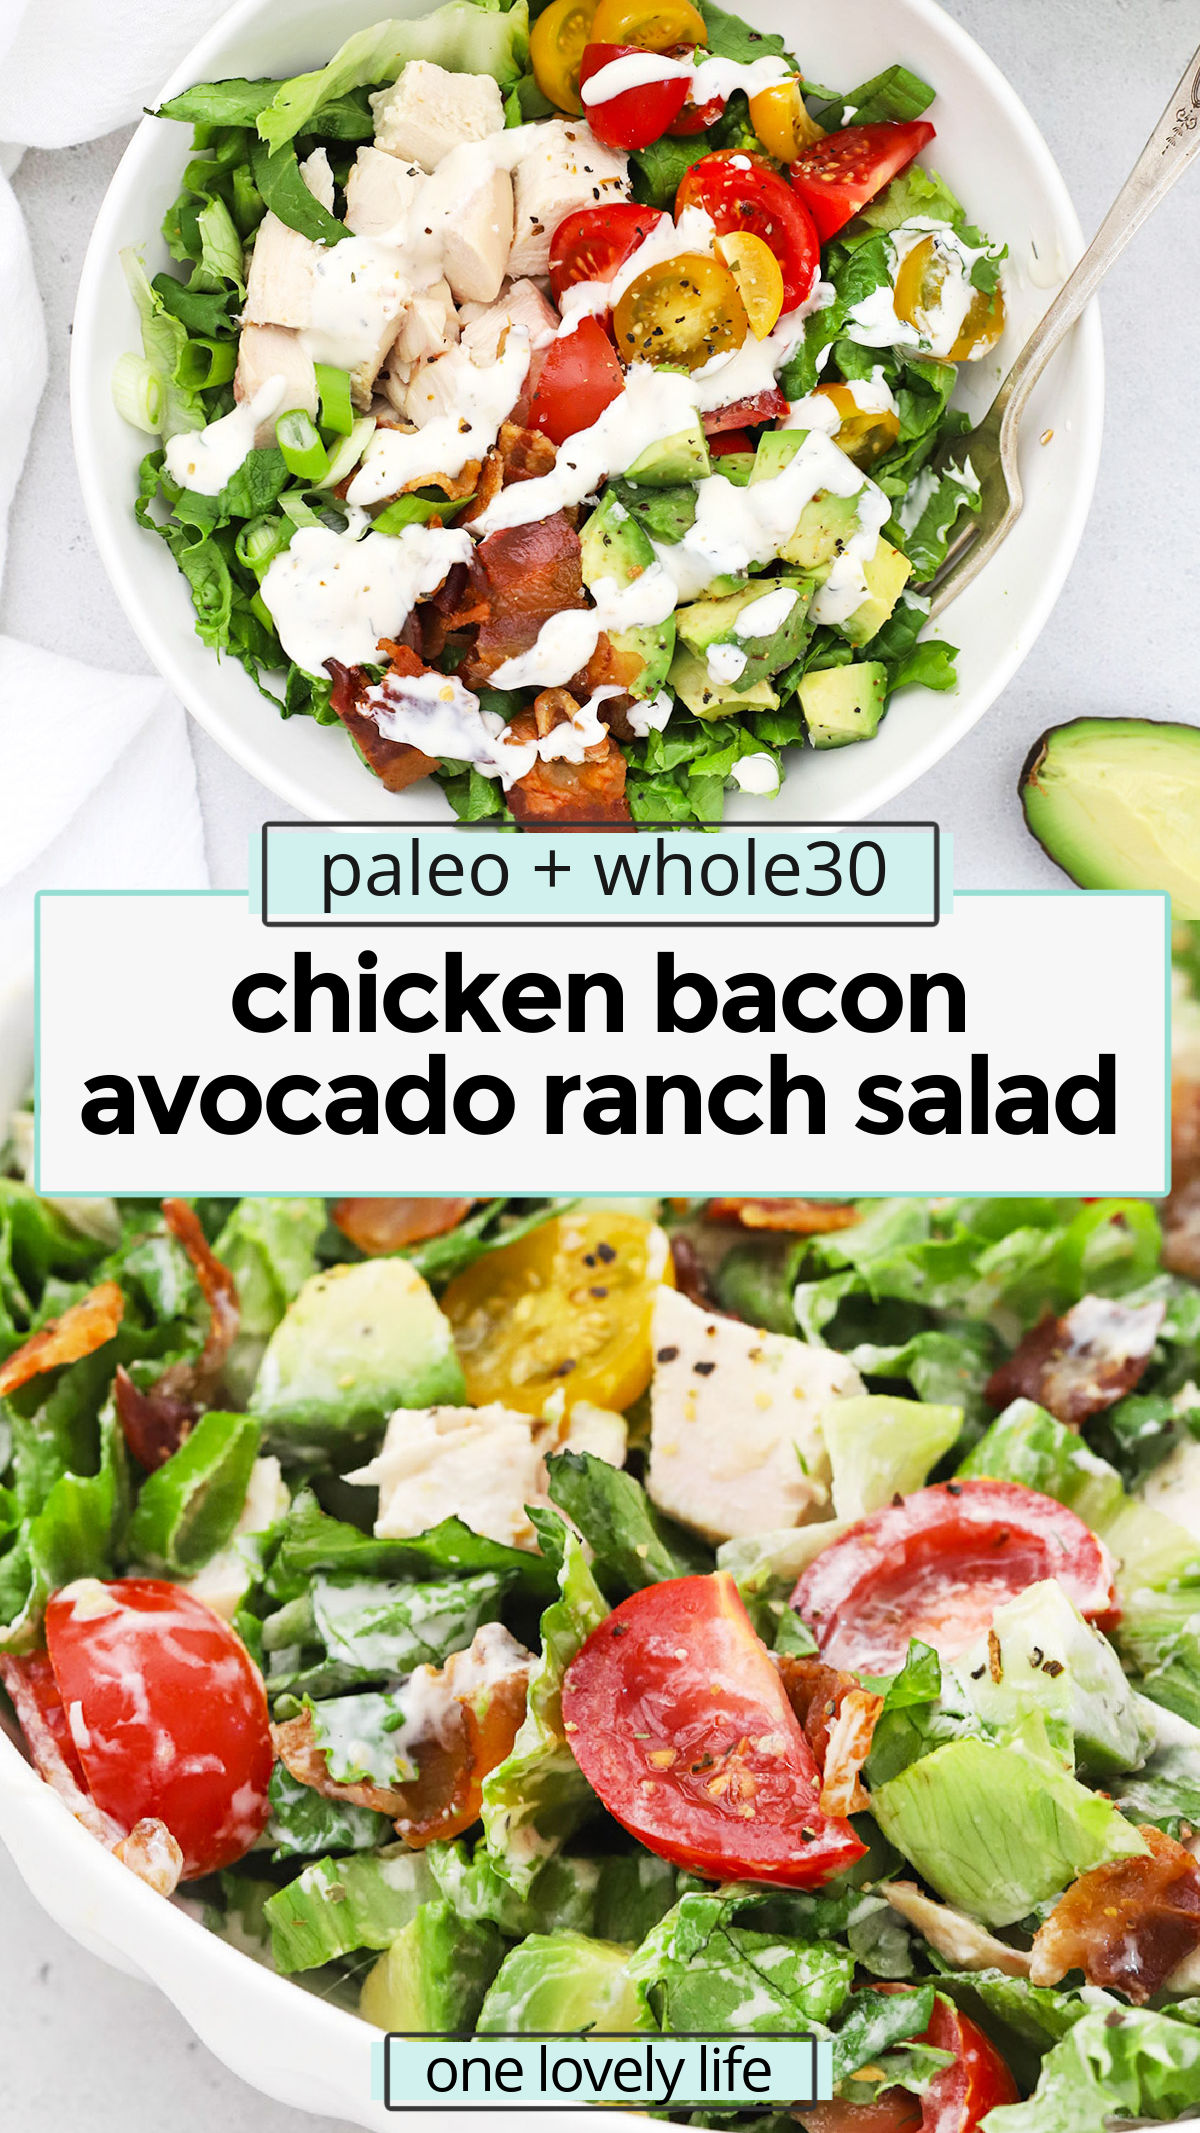 Chicken Bacon Avocado Ranch Salad - This chicken bacon ranch salad is loaded with goodies & finished with our creamy homemade ranch dressing. You'll LOVE it! (Paleo & Whole30 Friendly) // bacon ranch chicken salad // chicken bacon ranch salad recipe // paleo ranch // avocado chicken salad // main dish salad // dinner salad // picnic salad // potluck salad // low carb salad //